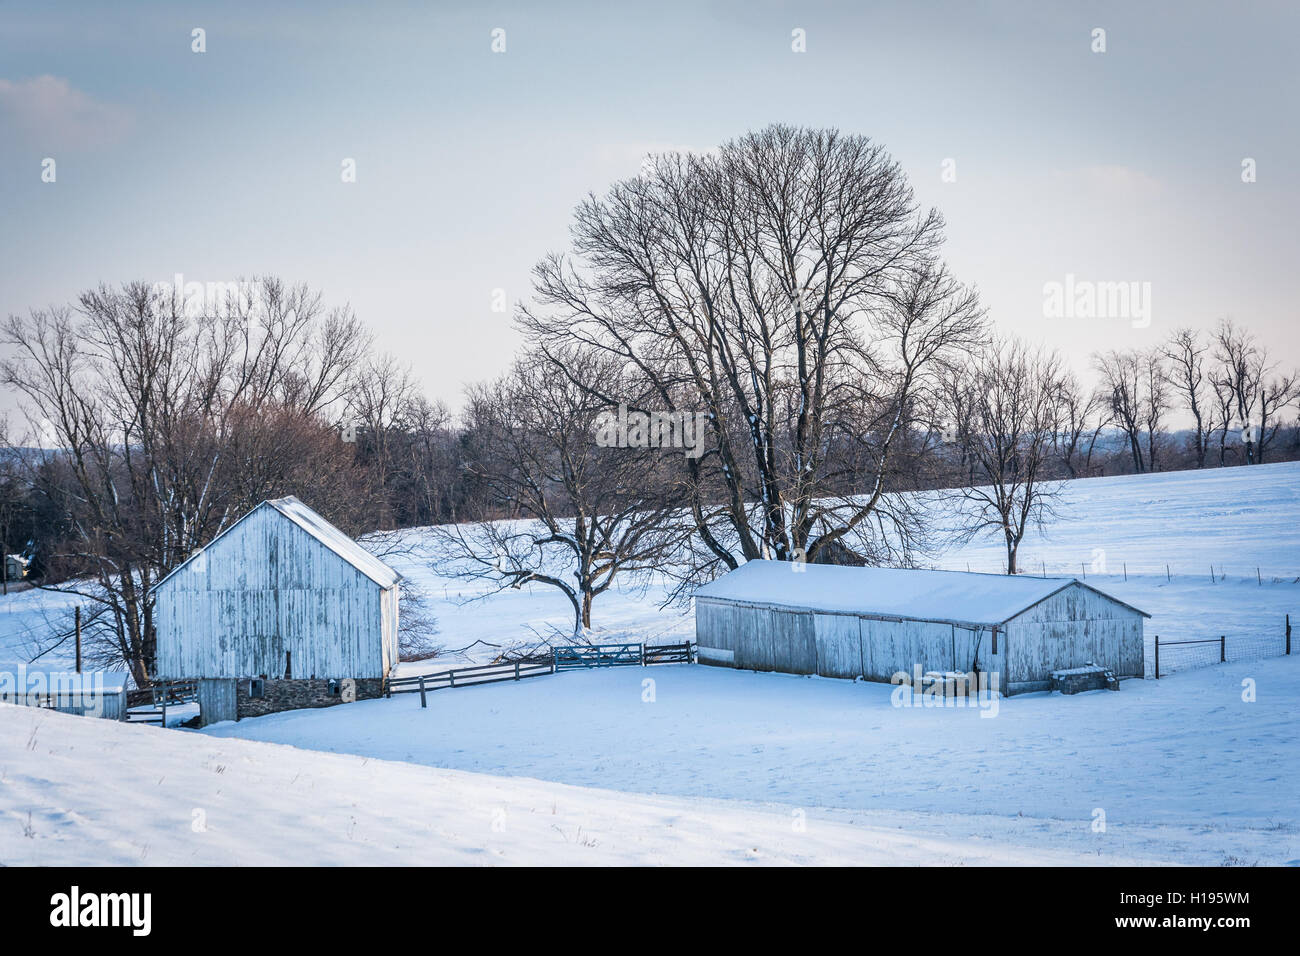 Snow-covered farm in rural Carroll County, Maryland. Stock Photo